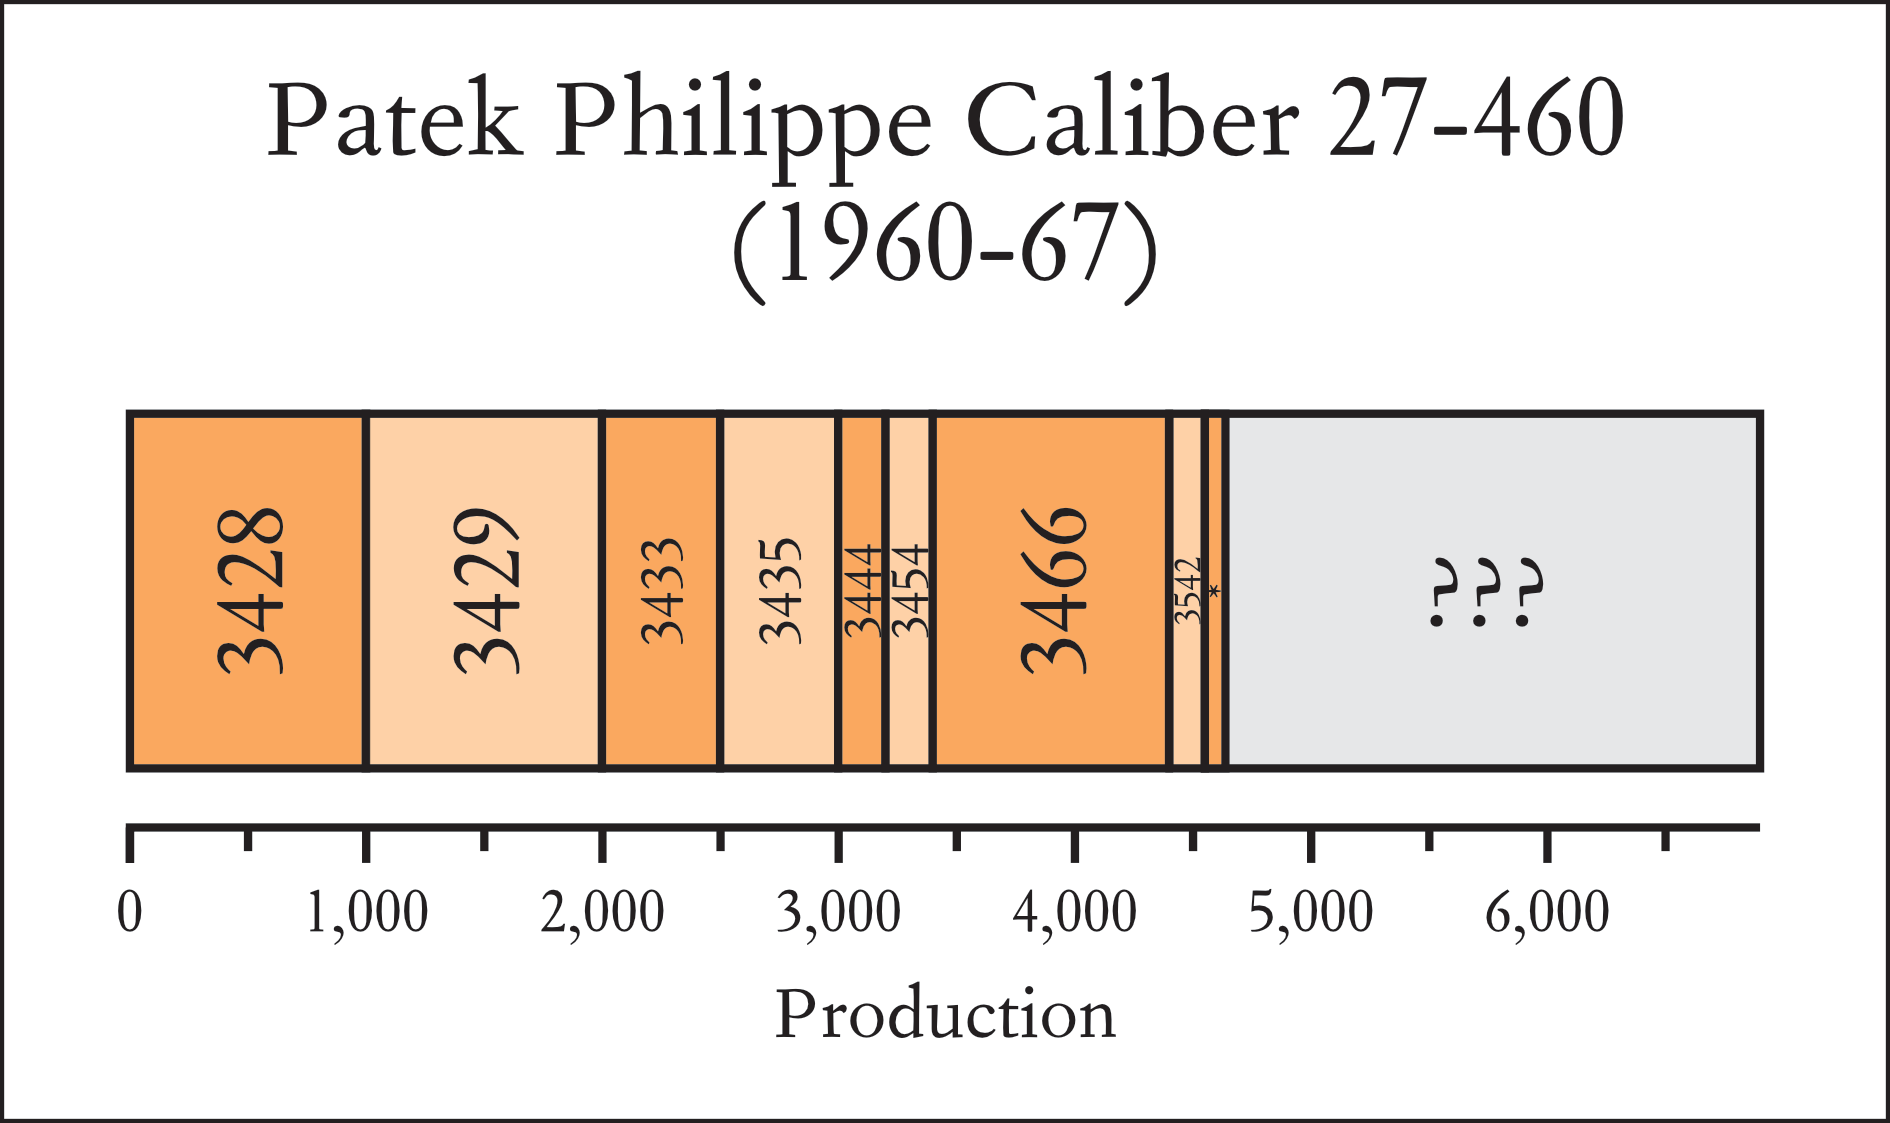 Production quantities of Patek Philippe Caliber 27-460 watches (1960-75)